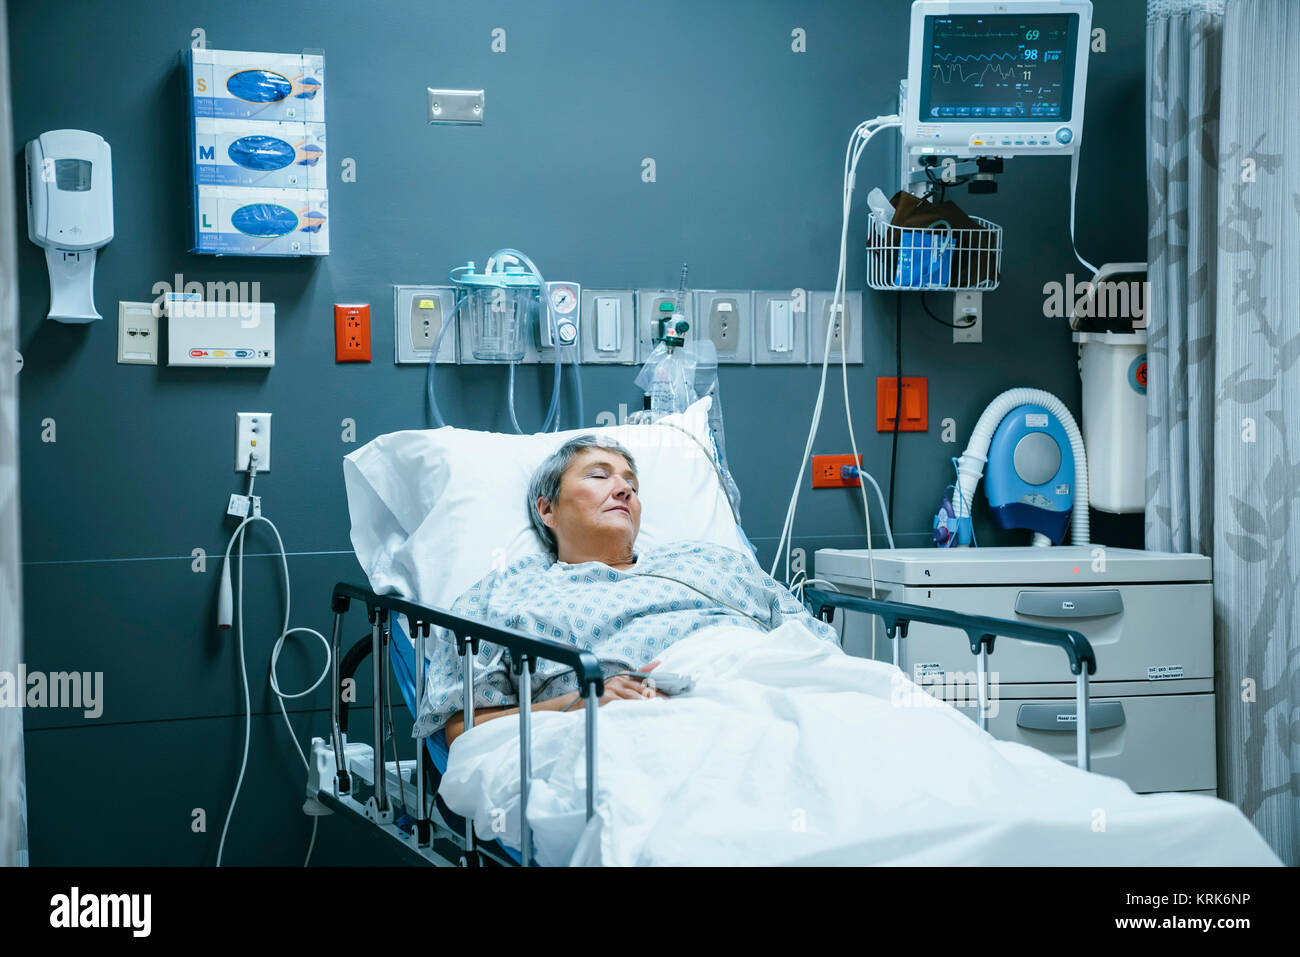 Mixed race patient sleeping in hospital bed Stock Photo